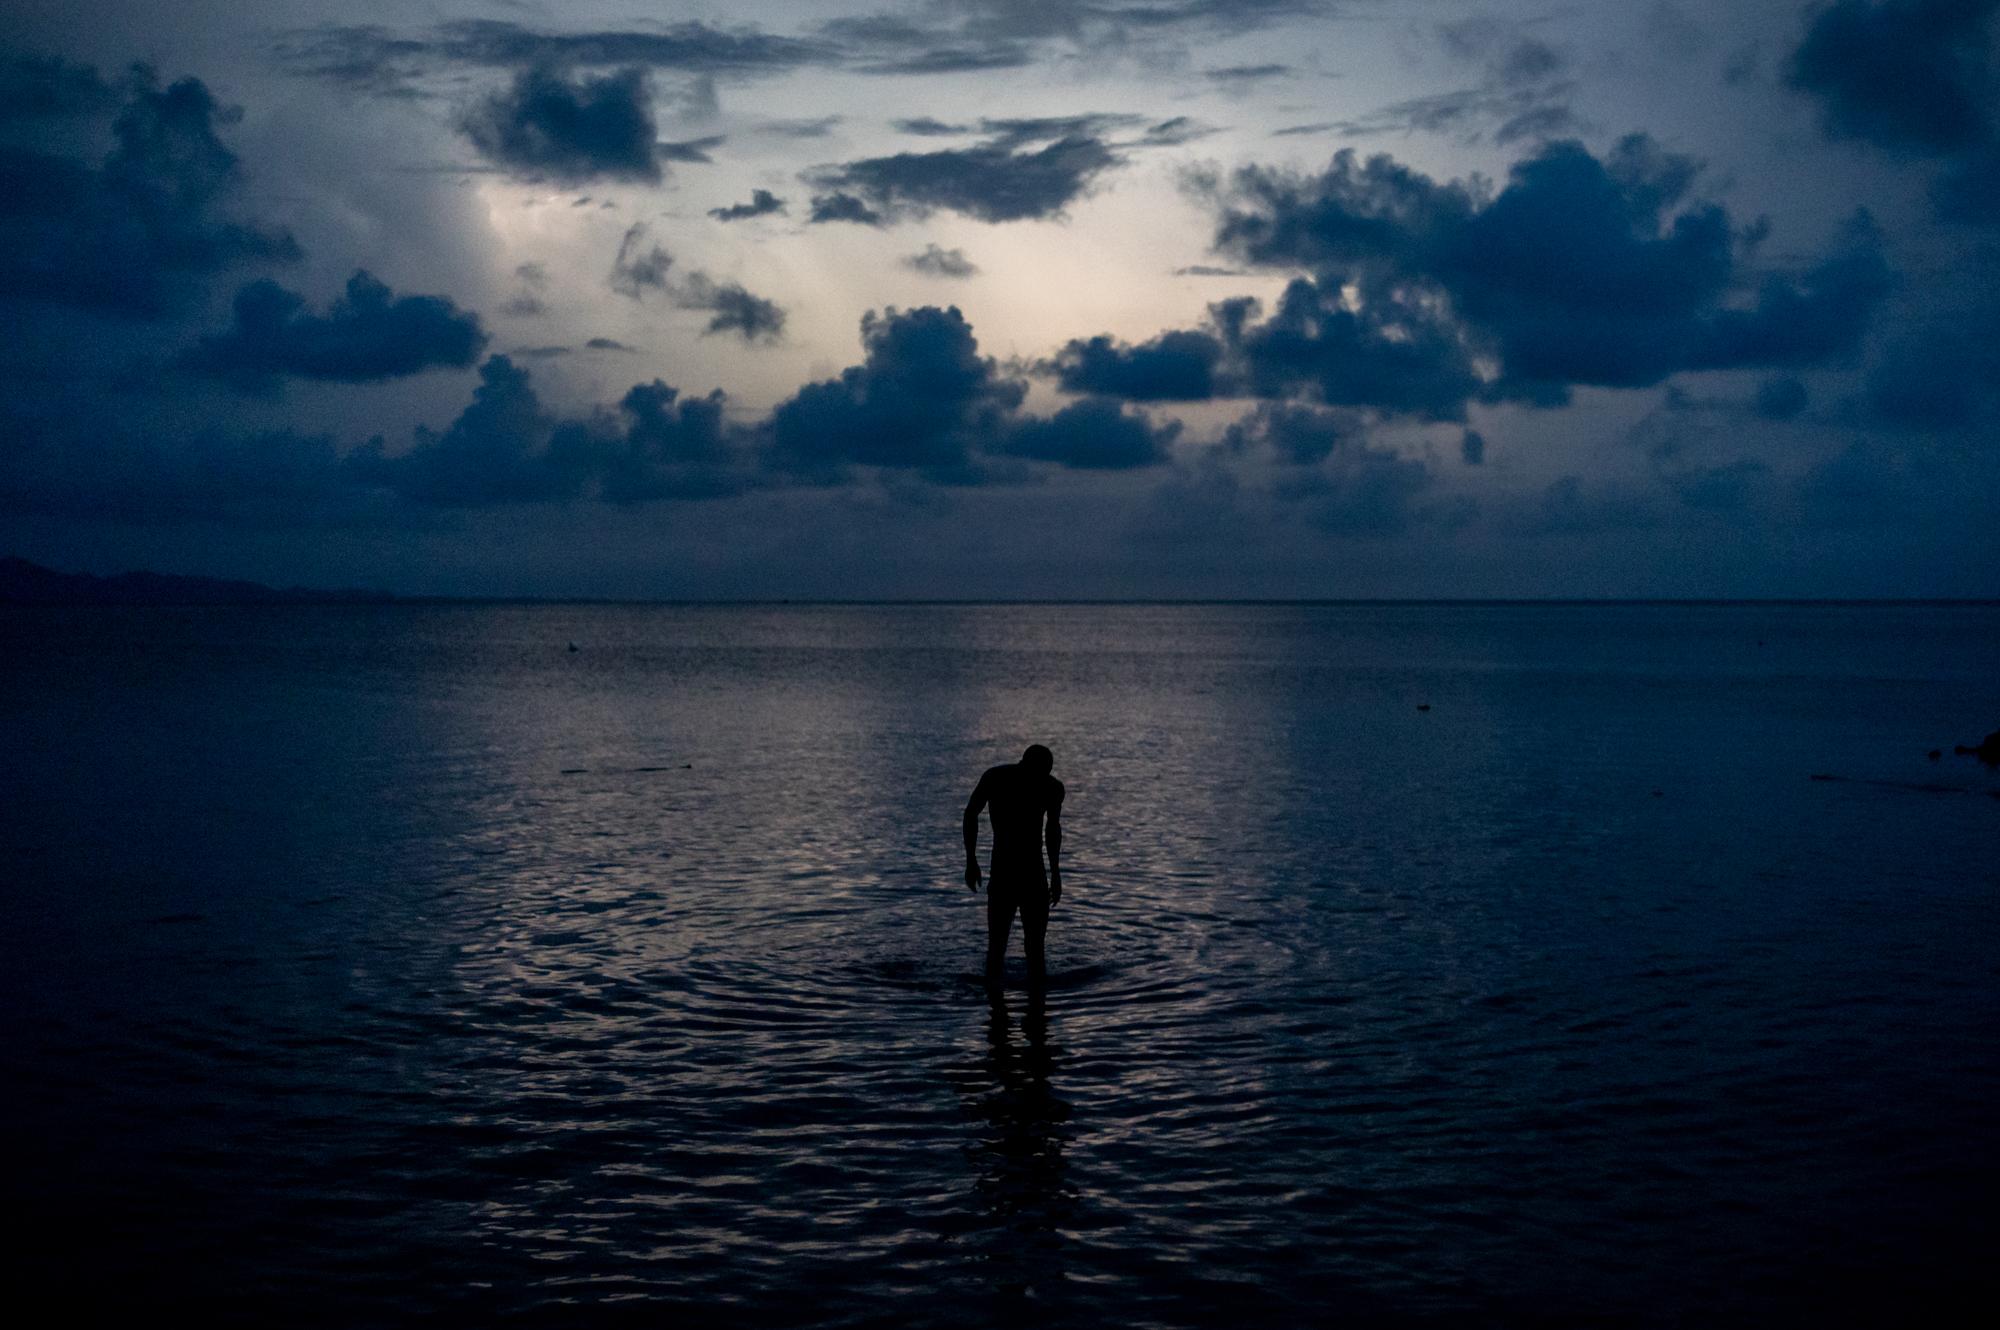 A Haitian migrant wades into the waters of the Gulf of Urab&aacute; as a lighting storm lights up the night sky across the gulf in...